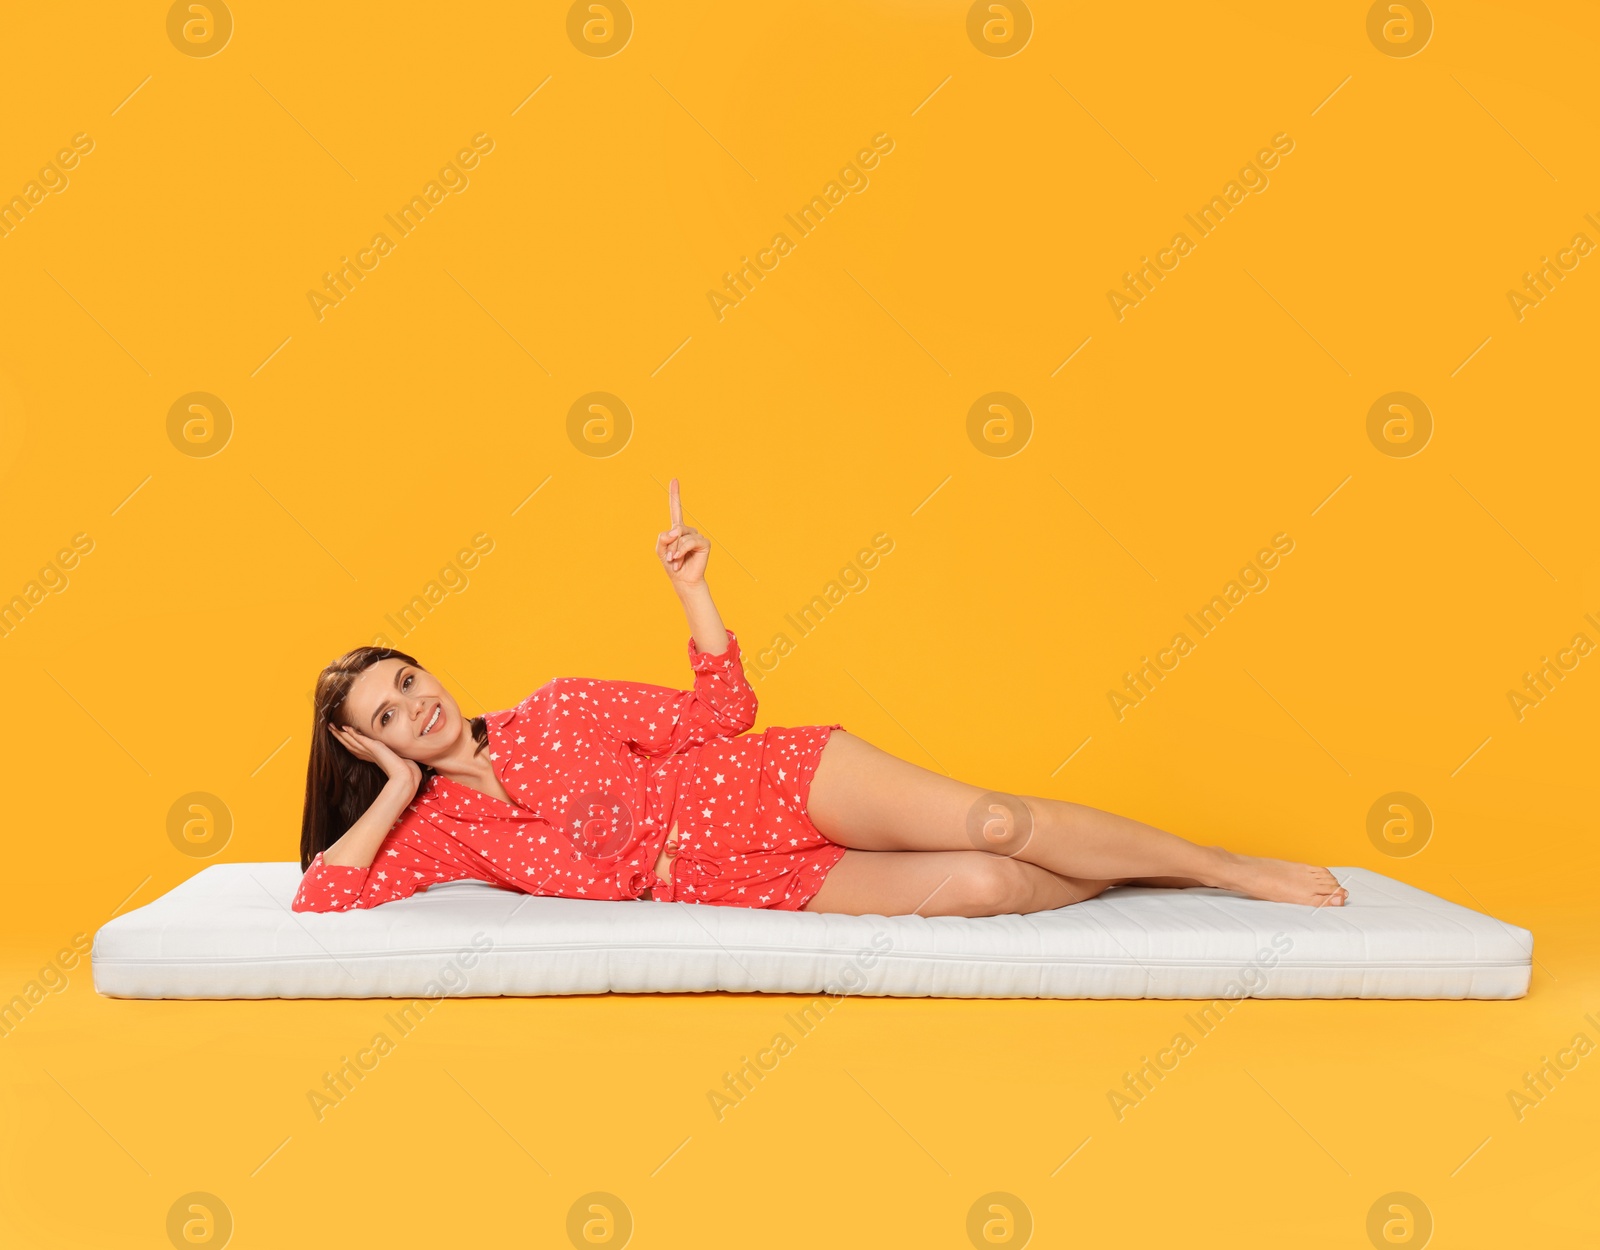 Photo of Young woman lying on soft mattress and pointing upwards against orange background